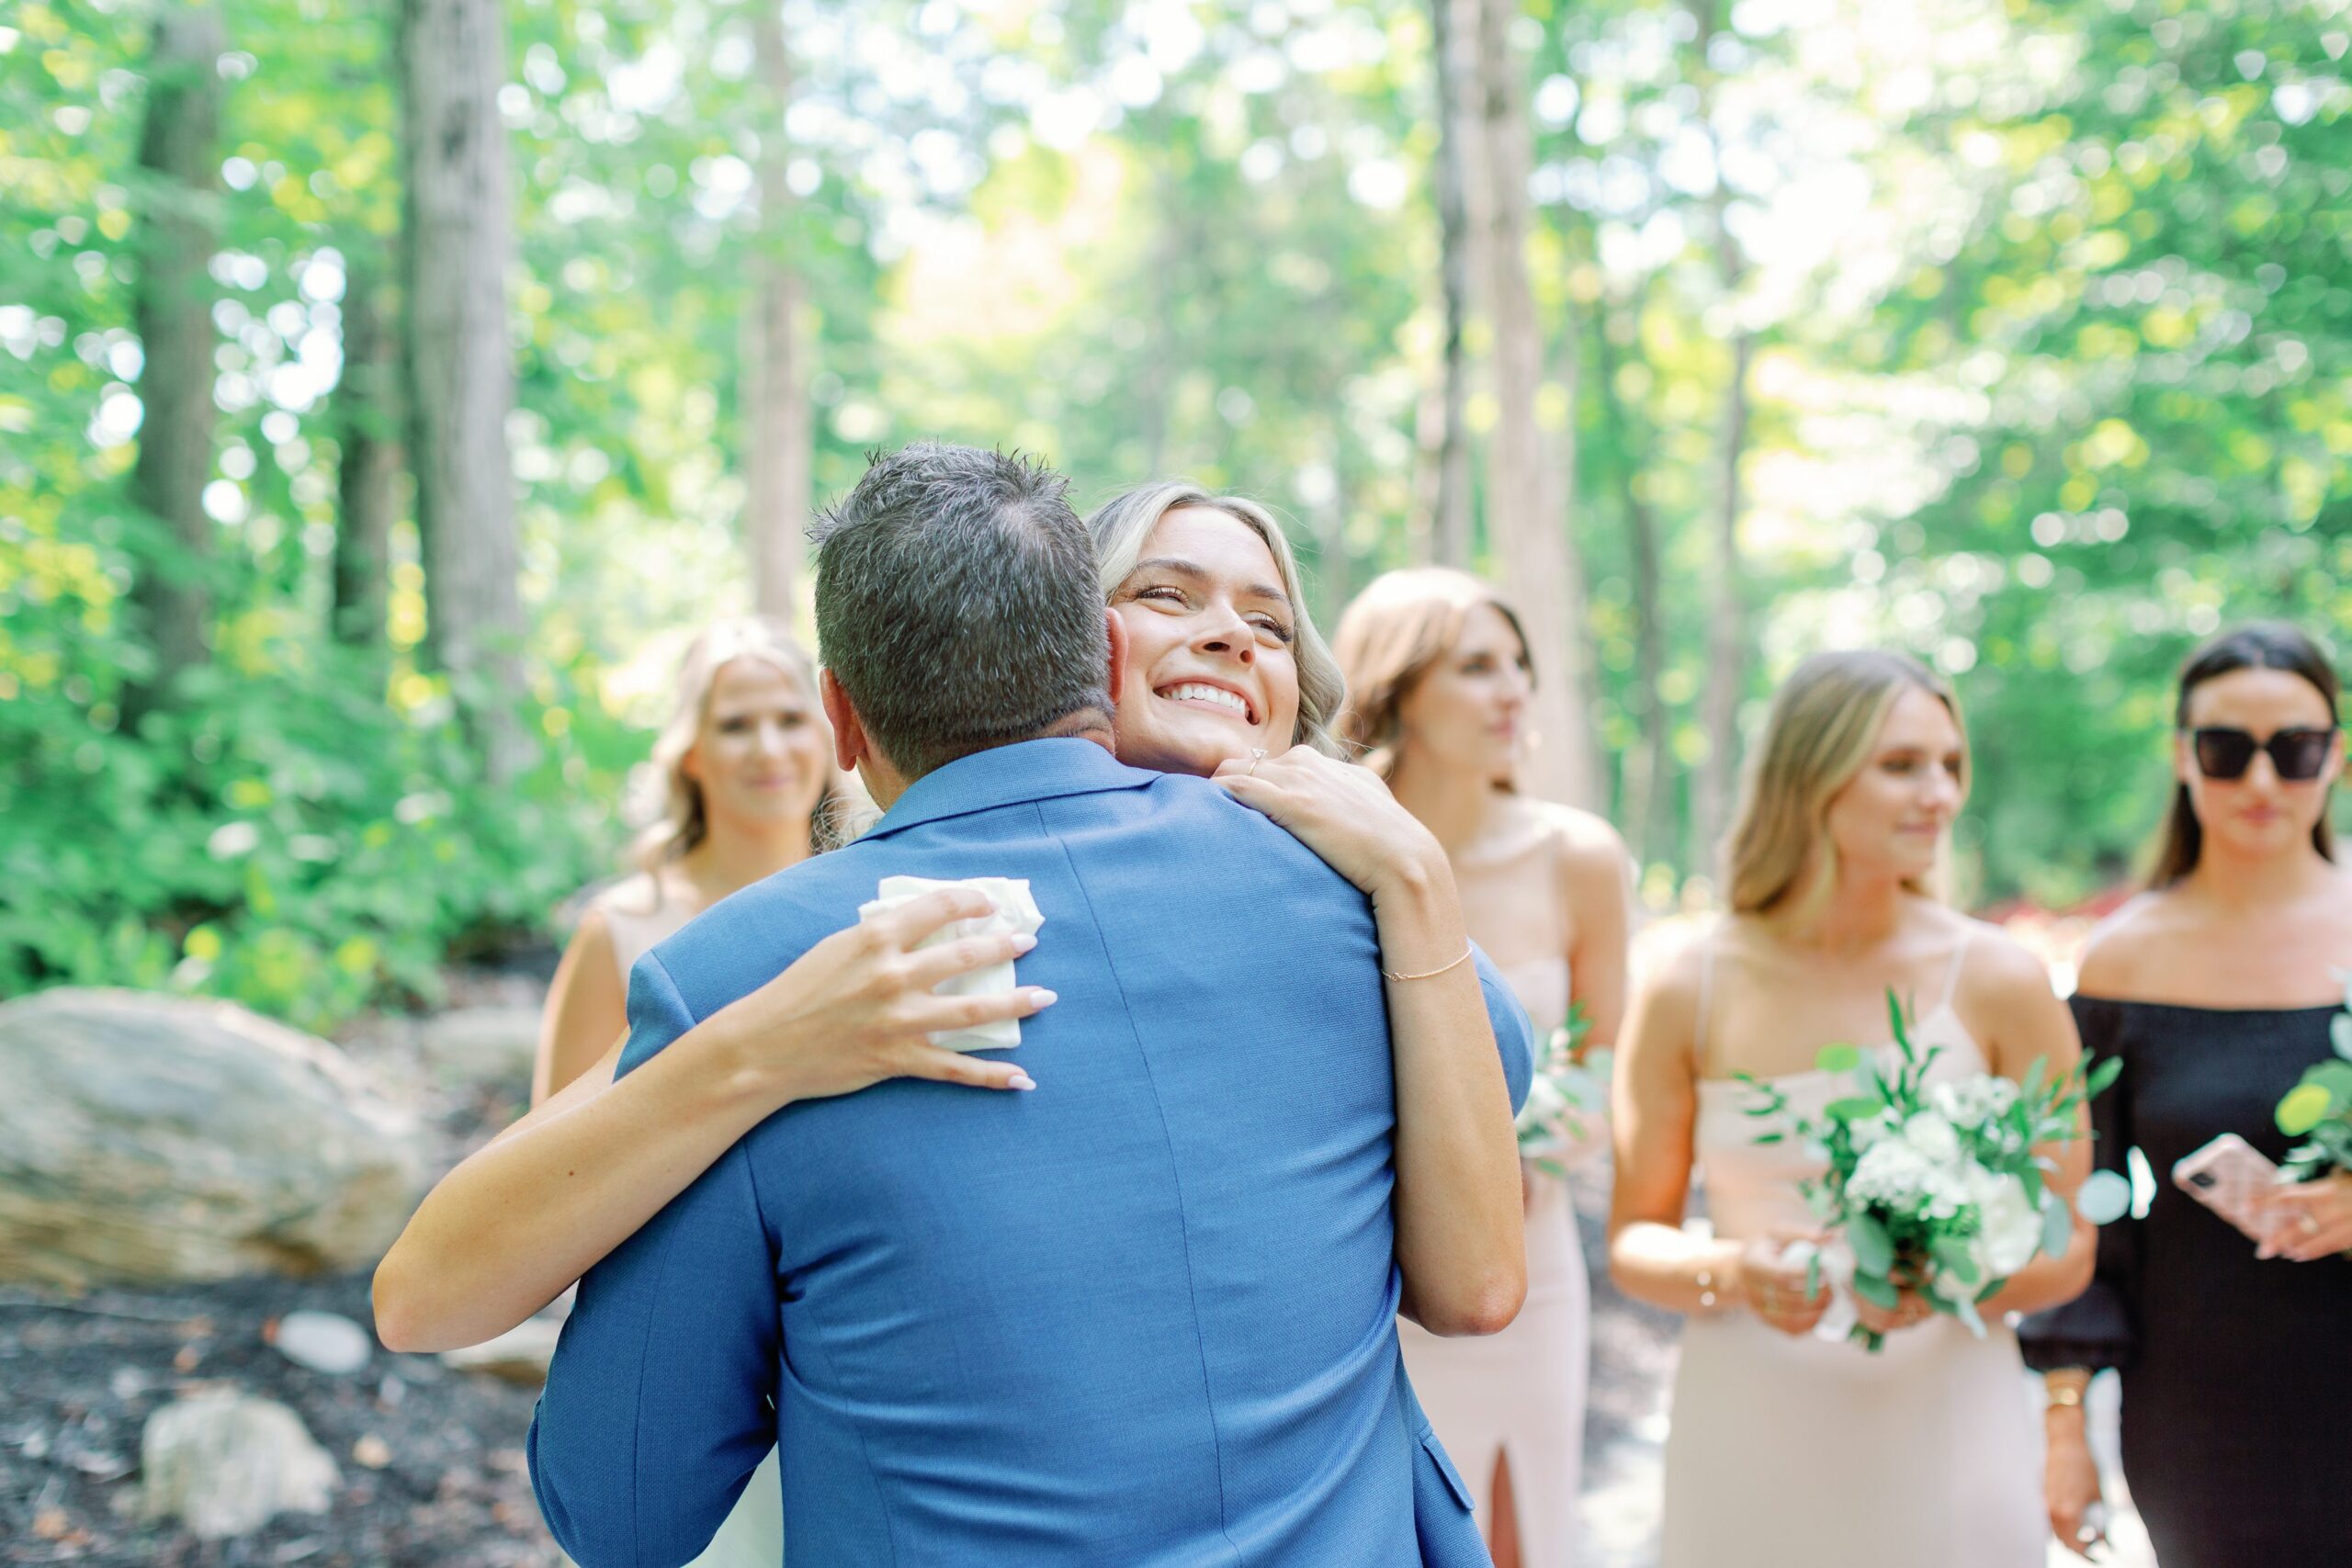 Candid moment of people hugging at outdoor wedding. Photographed by Maranda Elysse Photography.